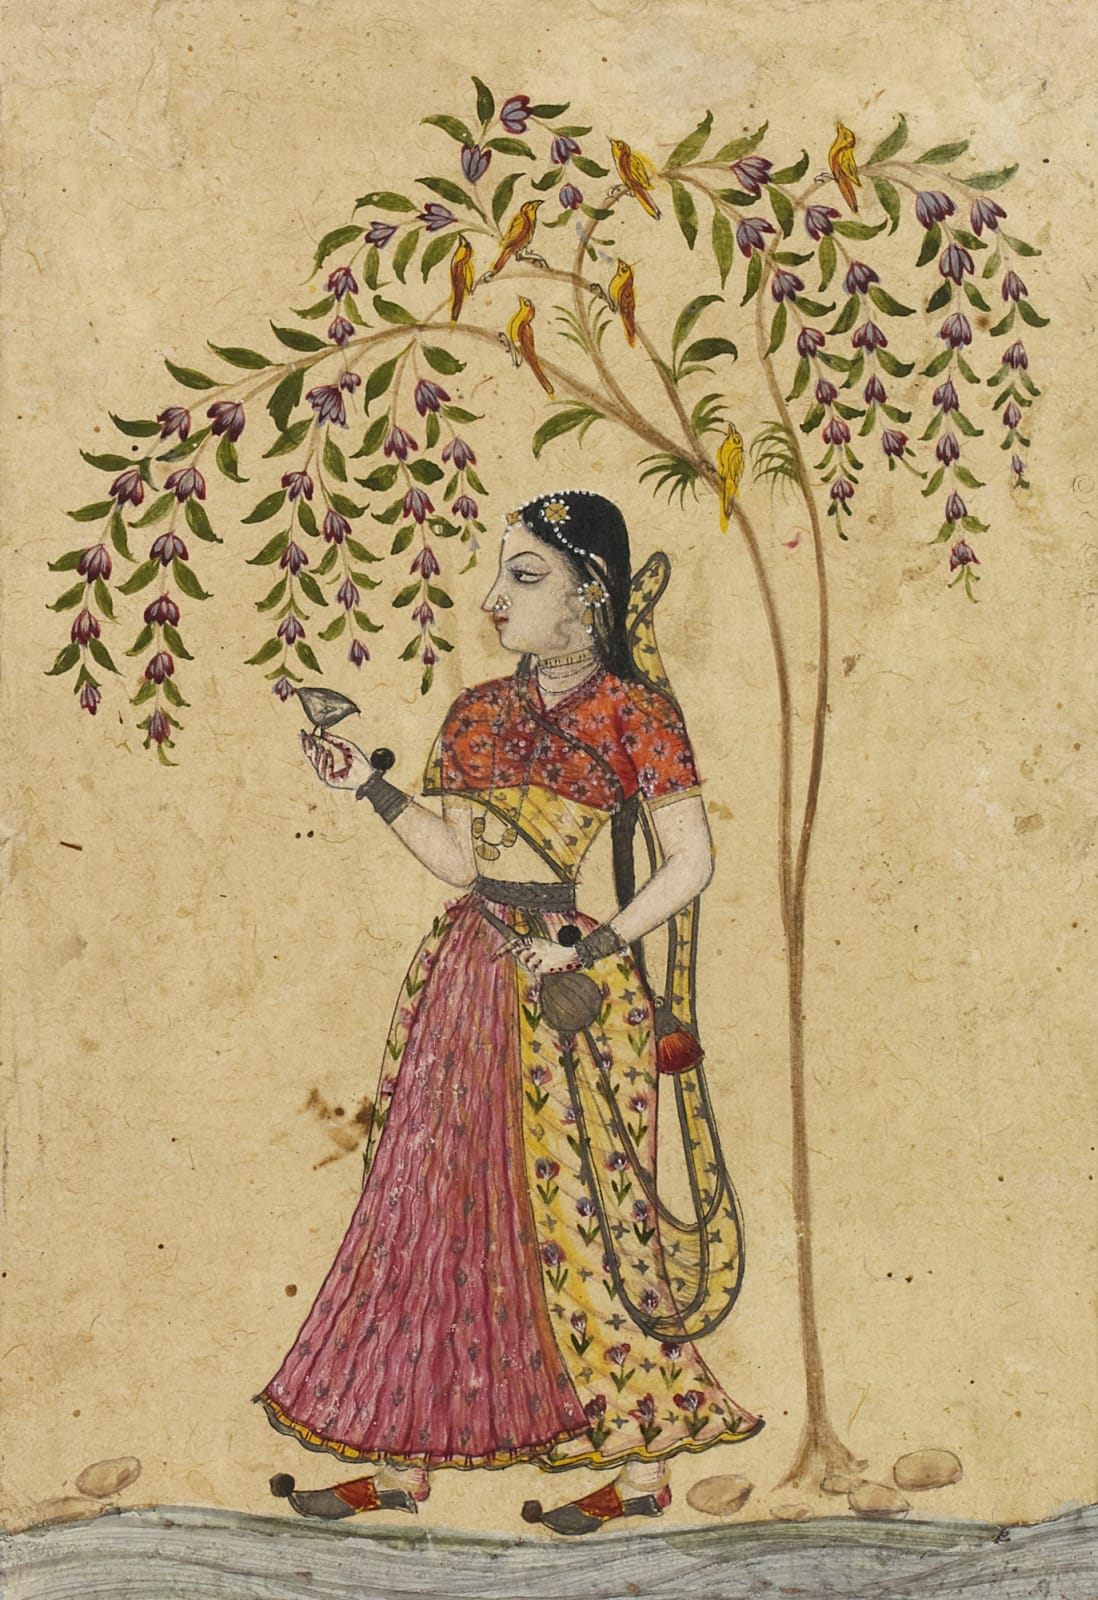 A Girl standing under a Tree, Northern Deccan, perhaps Maratha, c. 1750